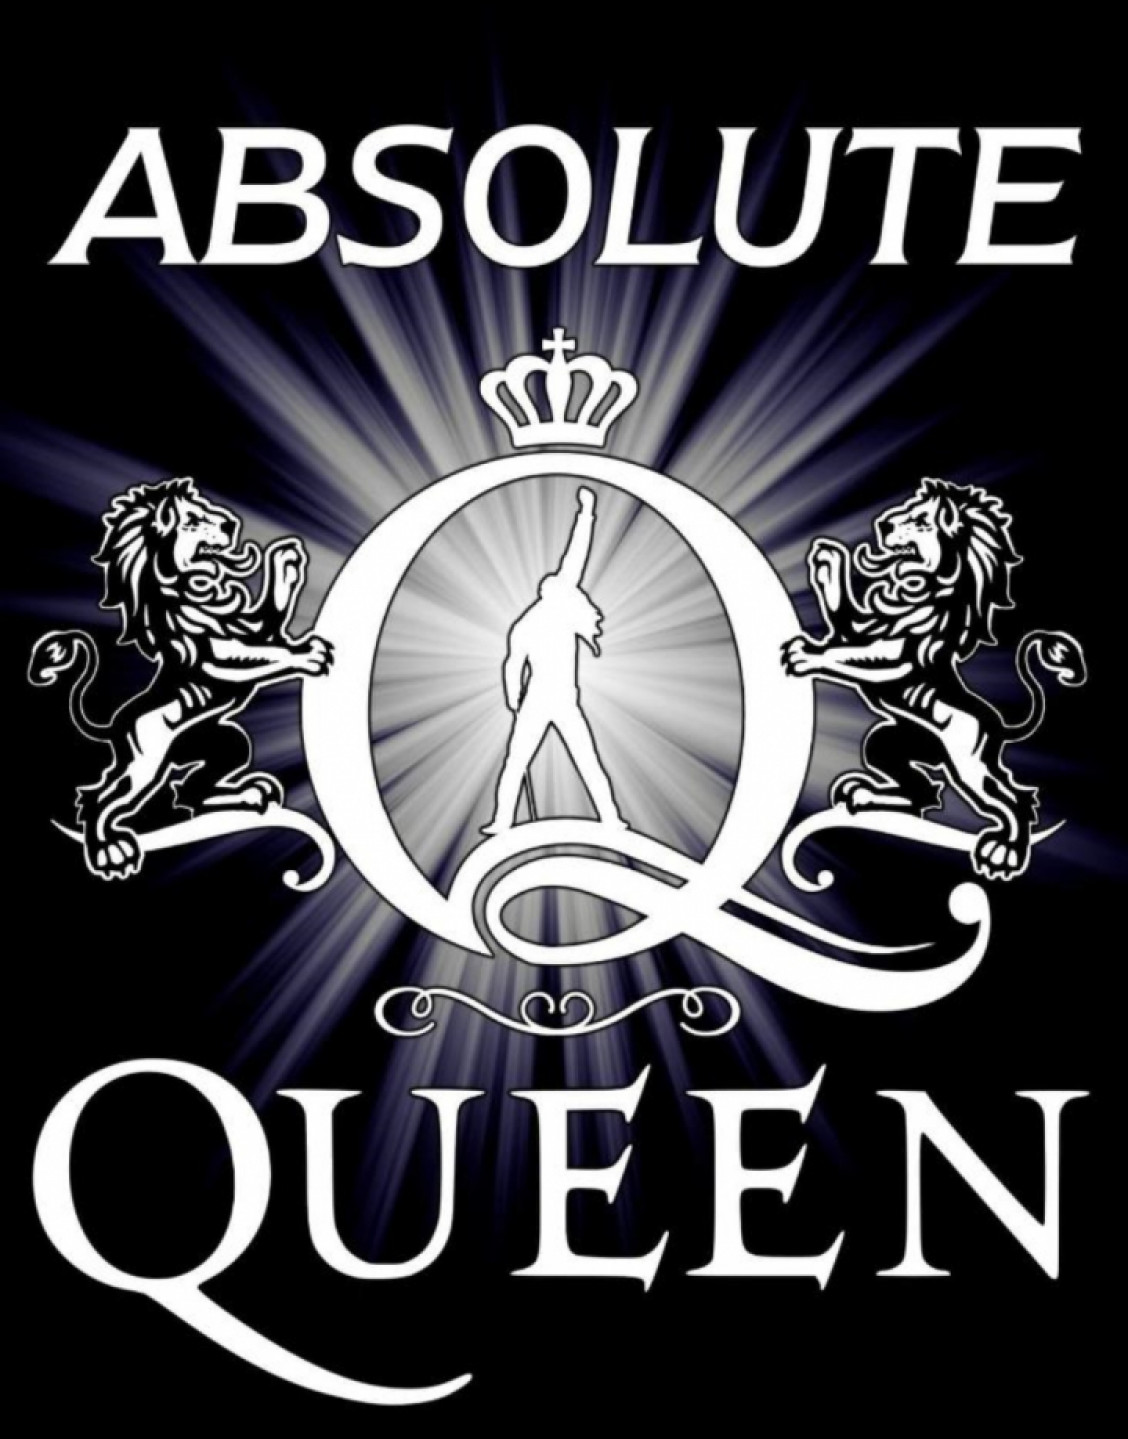 #1 Queen Tribute, Absolute Queen Performing Live @ Brooklyn Cantina, Saturday, June 1st 